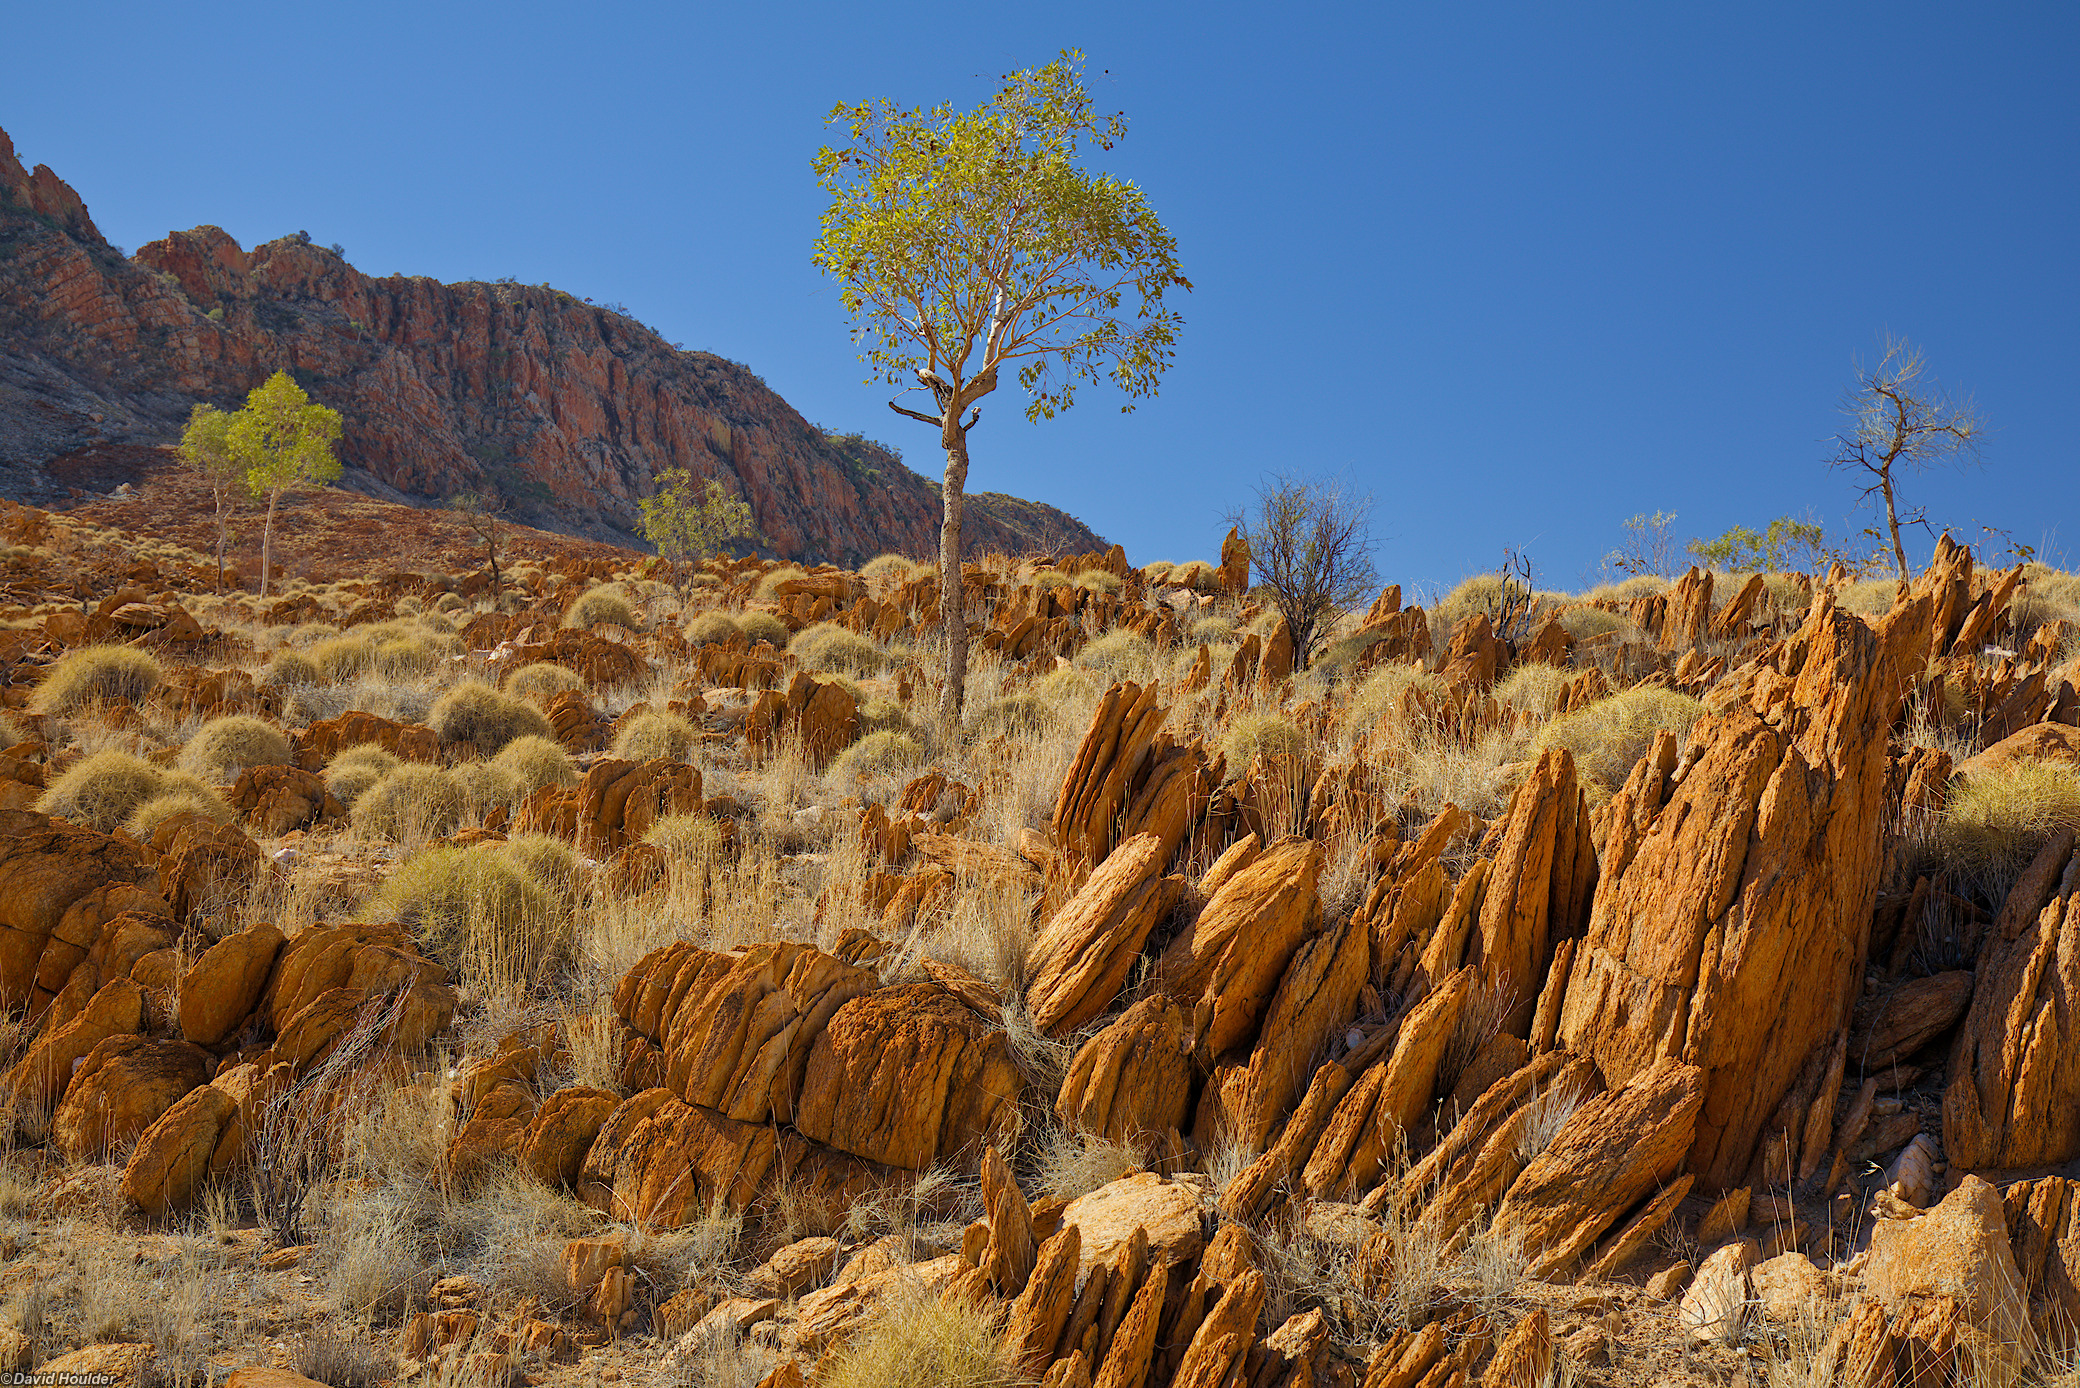 Rocky, arid slope with small tress and a cliff in the background